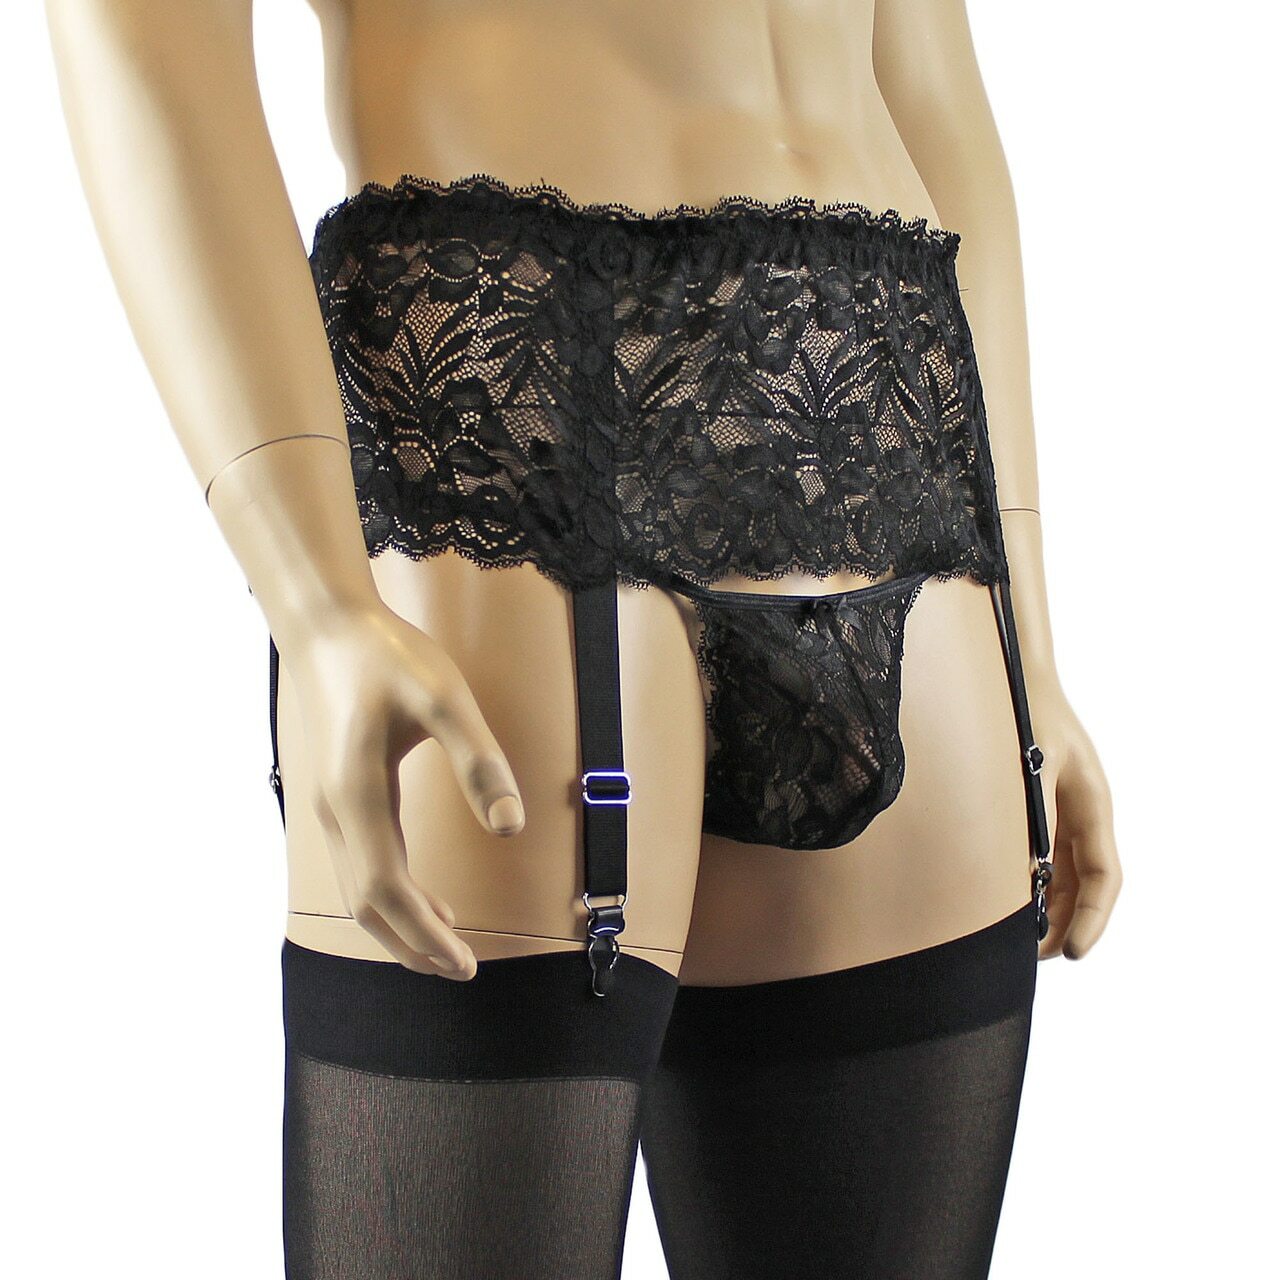 Mens Sexy Lace Pouch G string, Garterbelt & Stockings (black plus other colours)